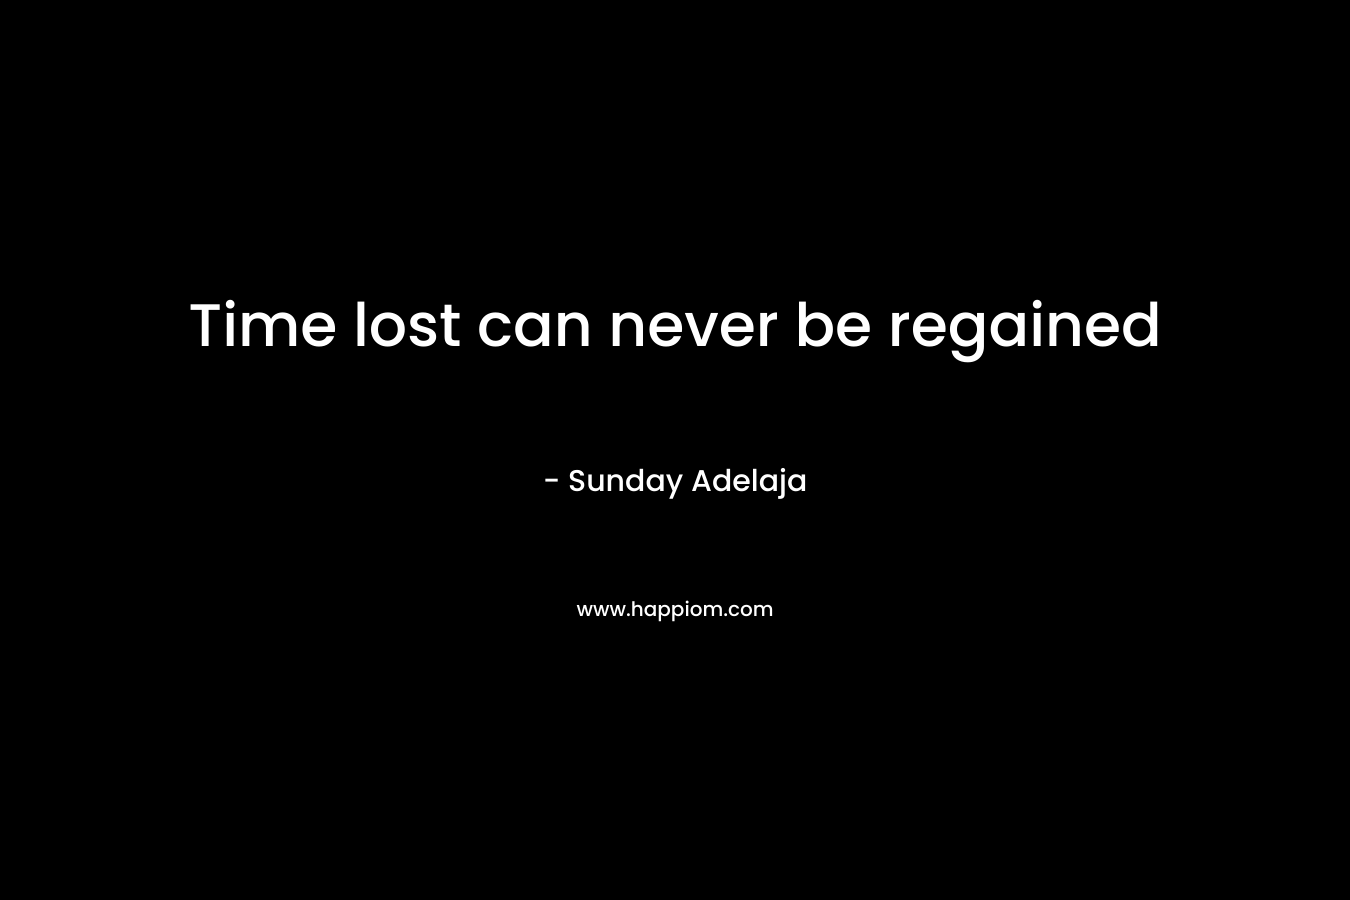 Time lost can never be regained